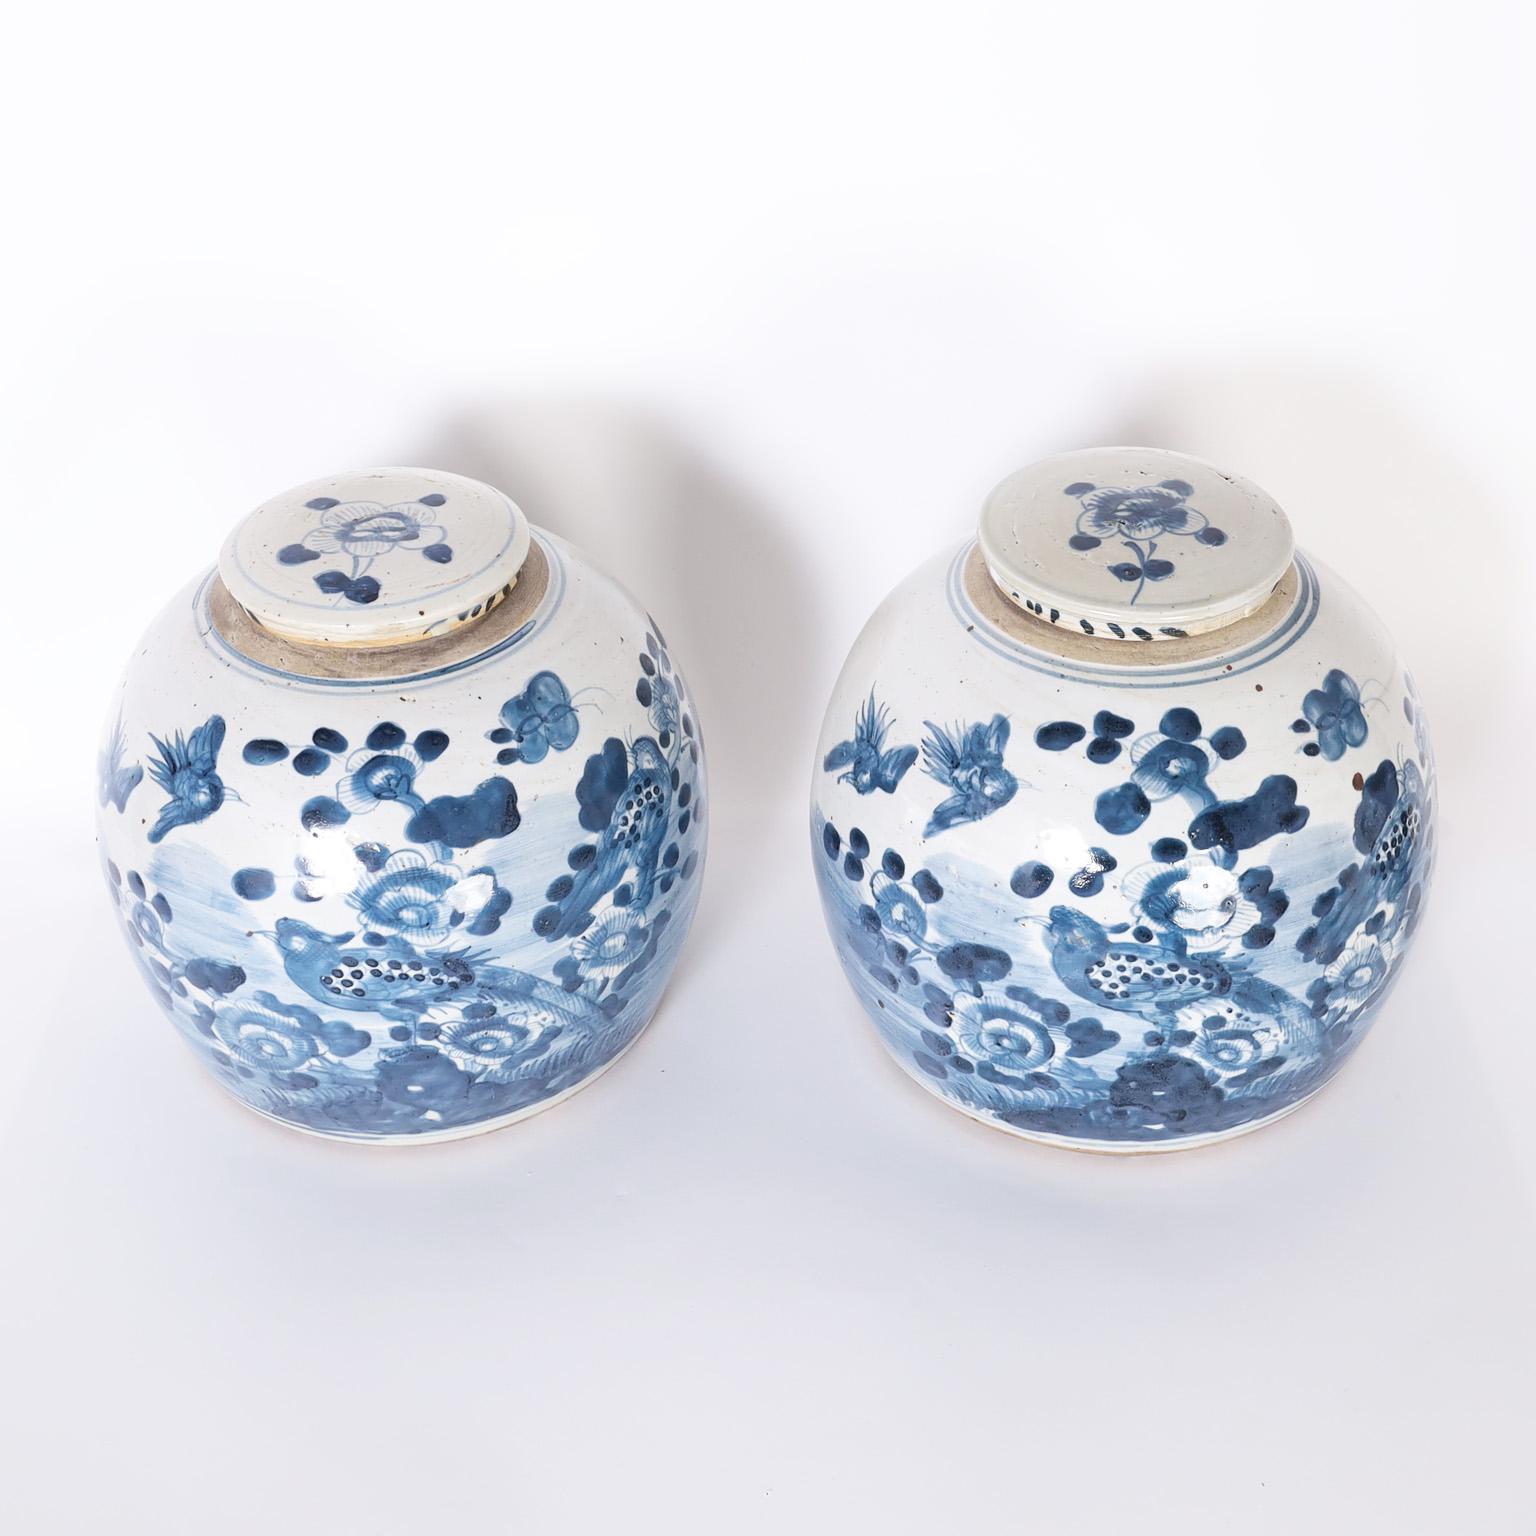 Pair of Chinese blue and white porcelain lidded jars with bulbous form hand decorated with birds and flowers.